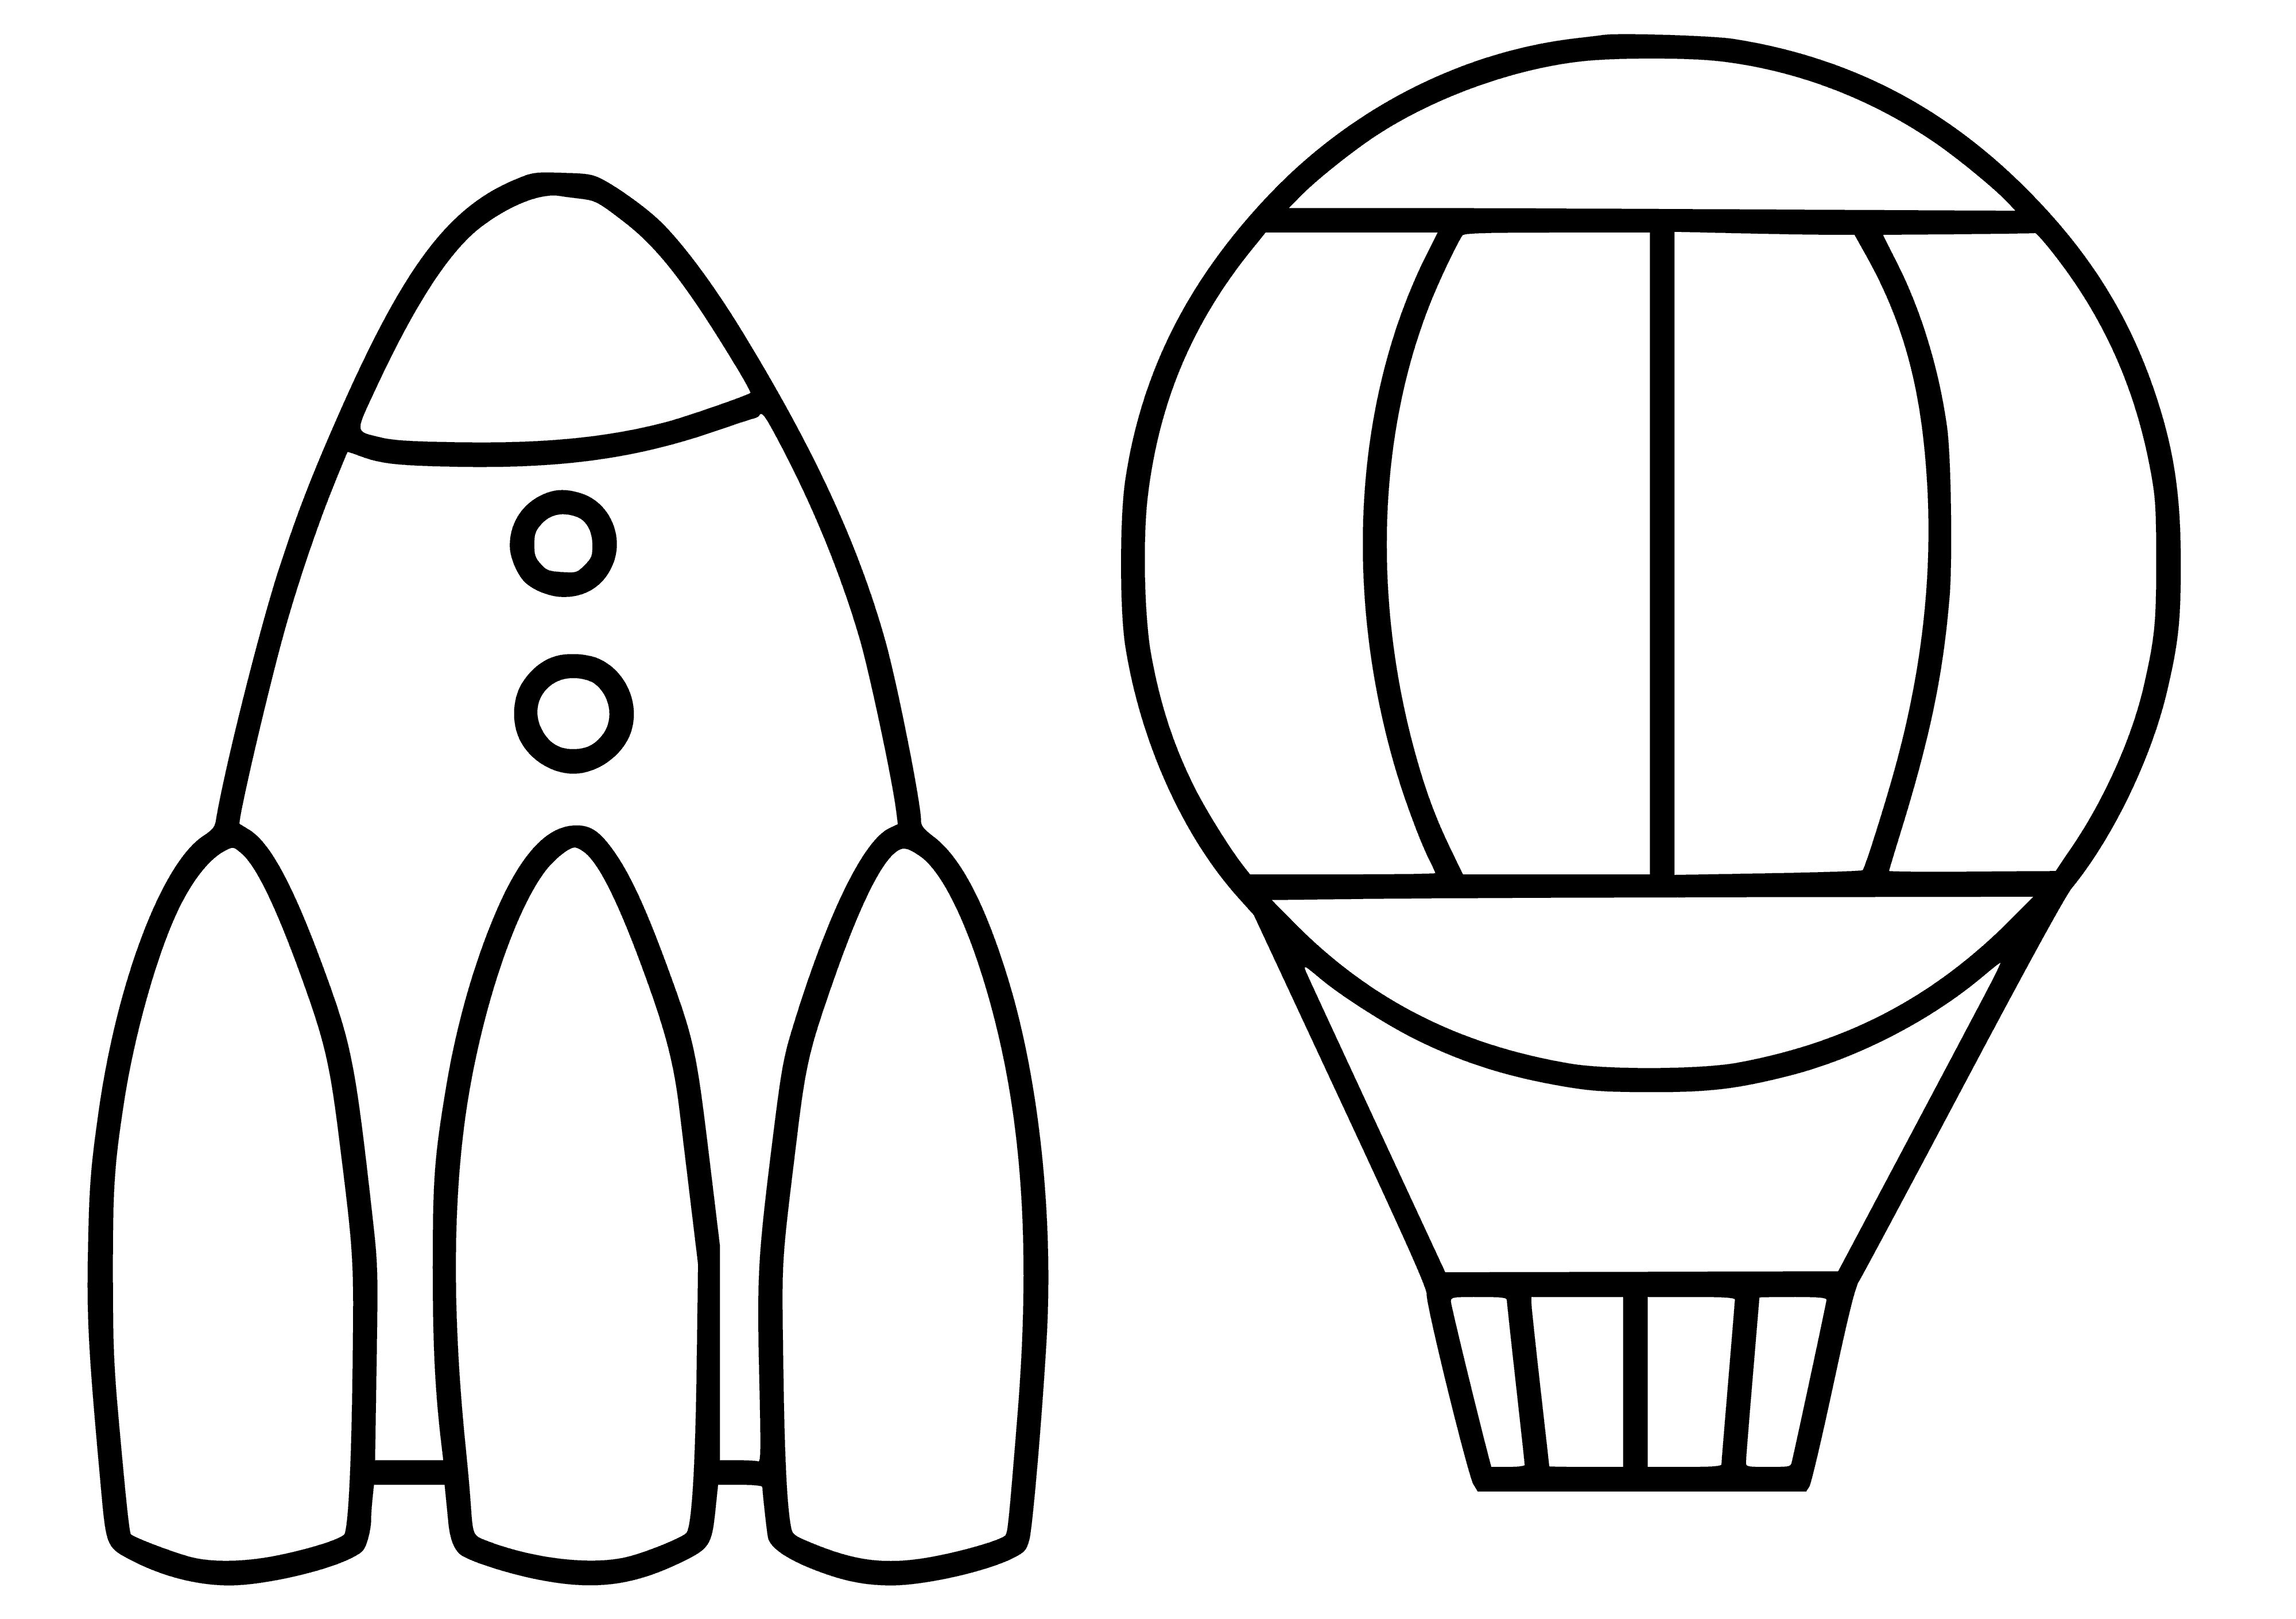 Rocket and ball coloring page